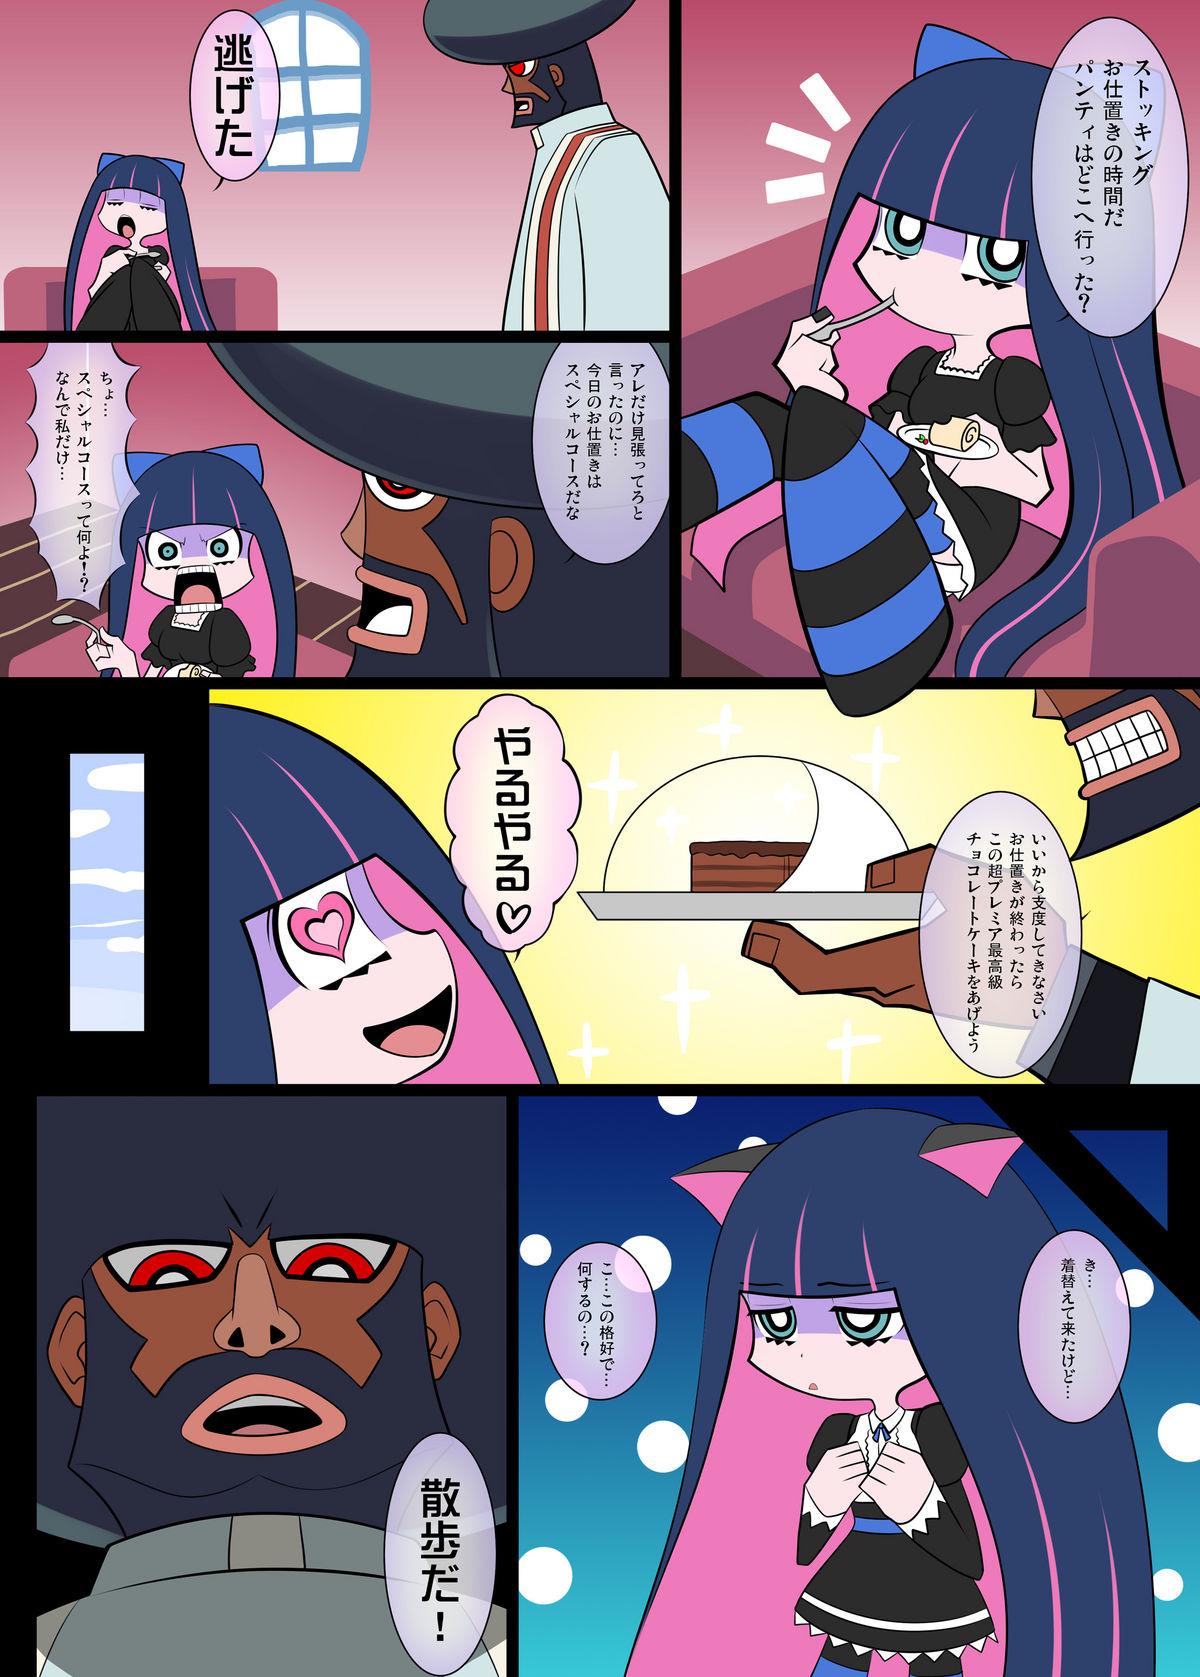 Hot Fuck Sperma & Sweets with Villager - Panty and stocking with garterbelt Kitchen - Page 3